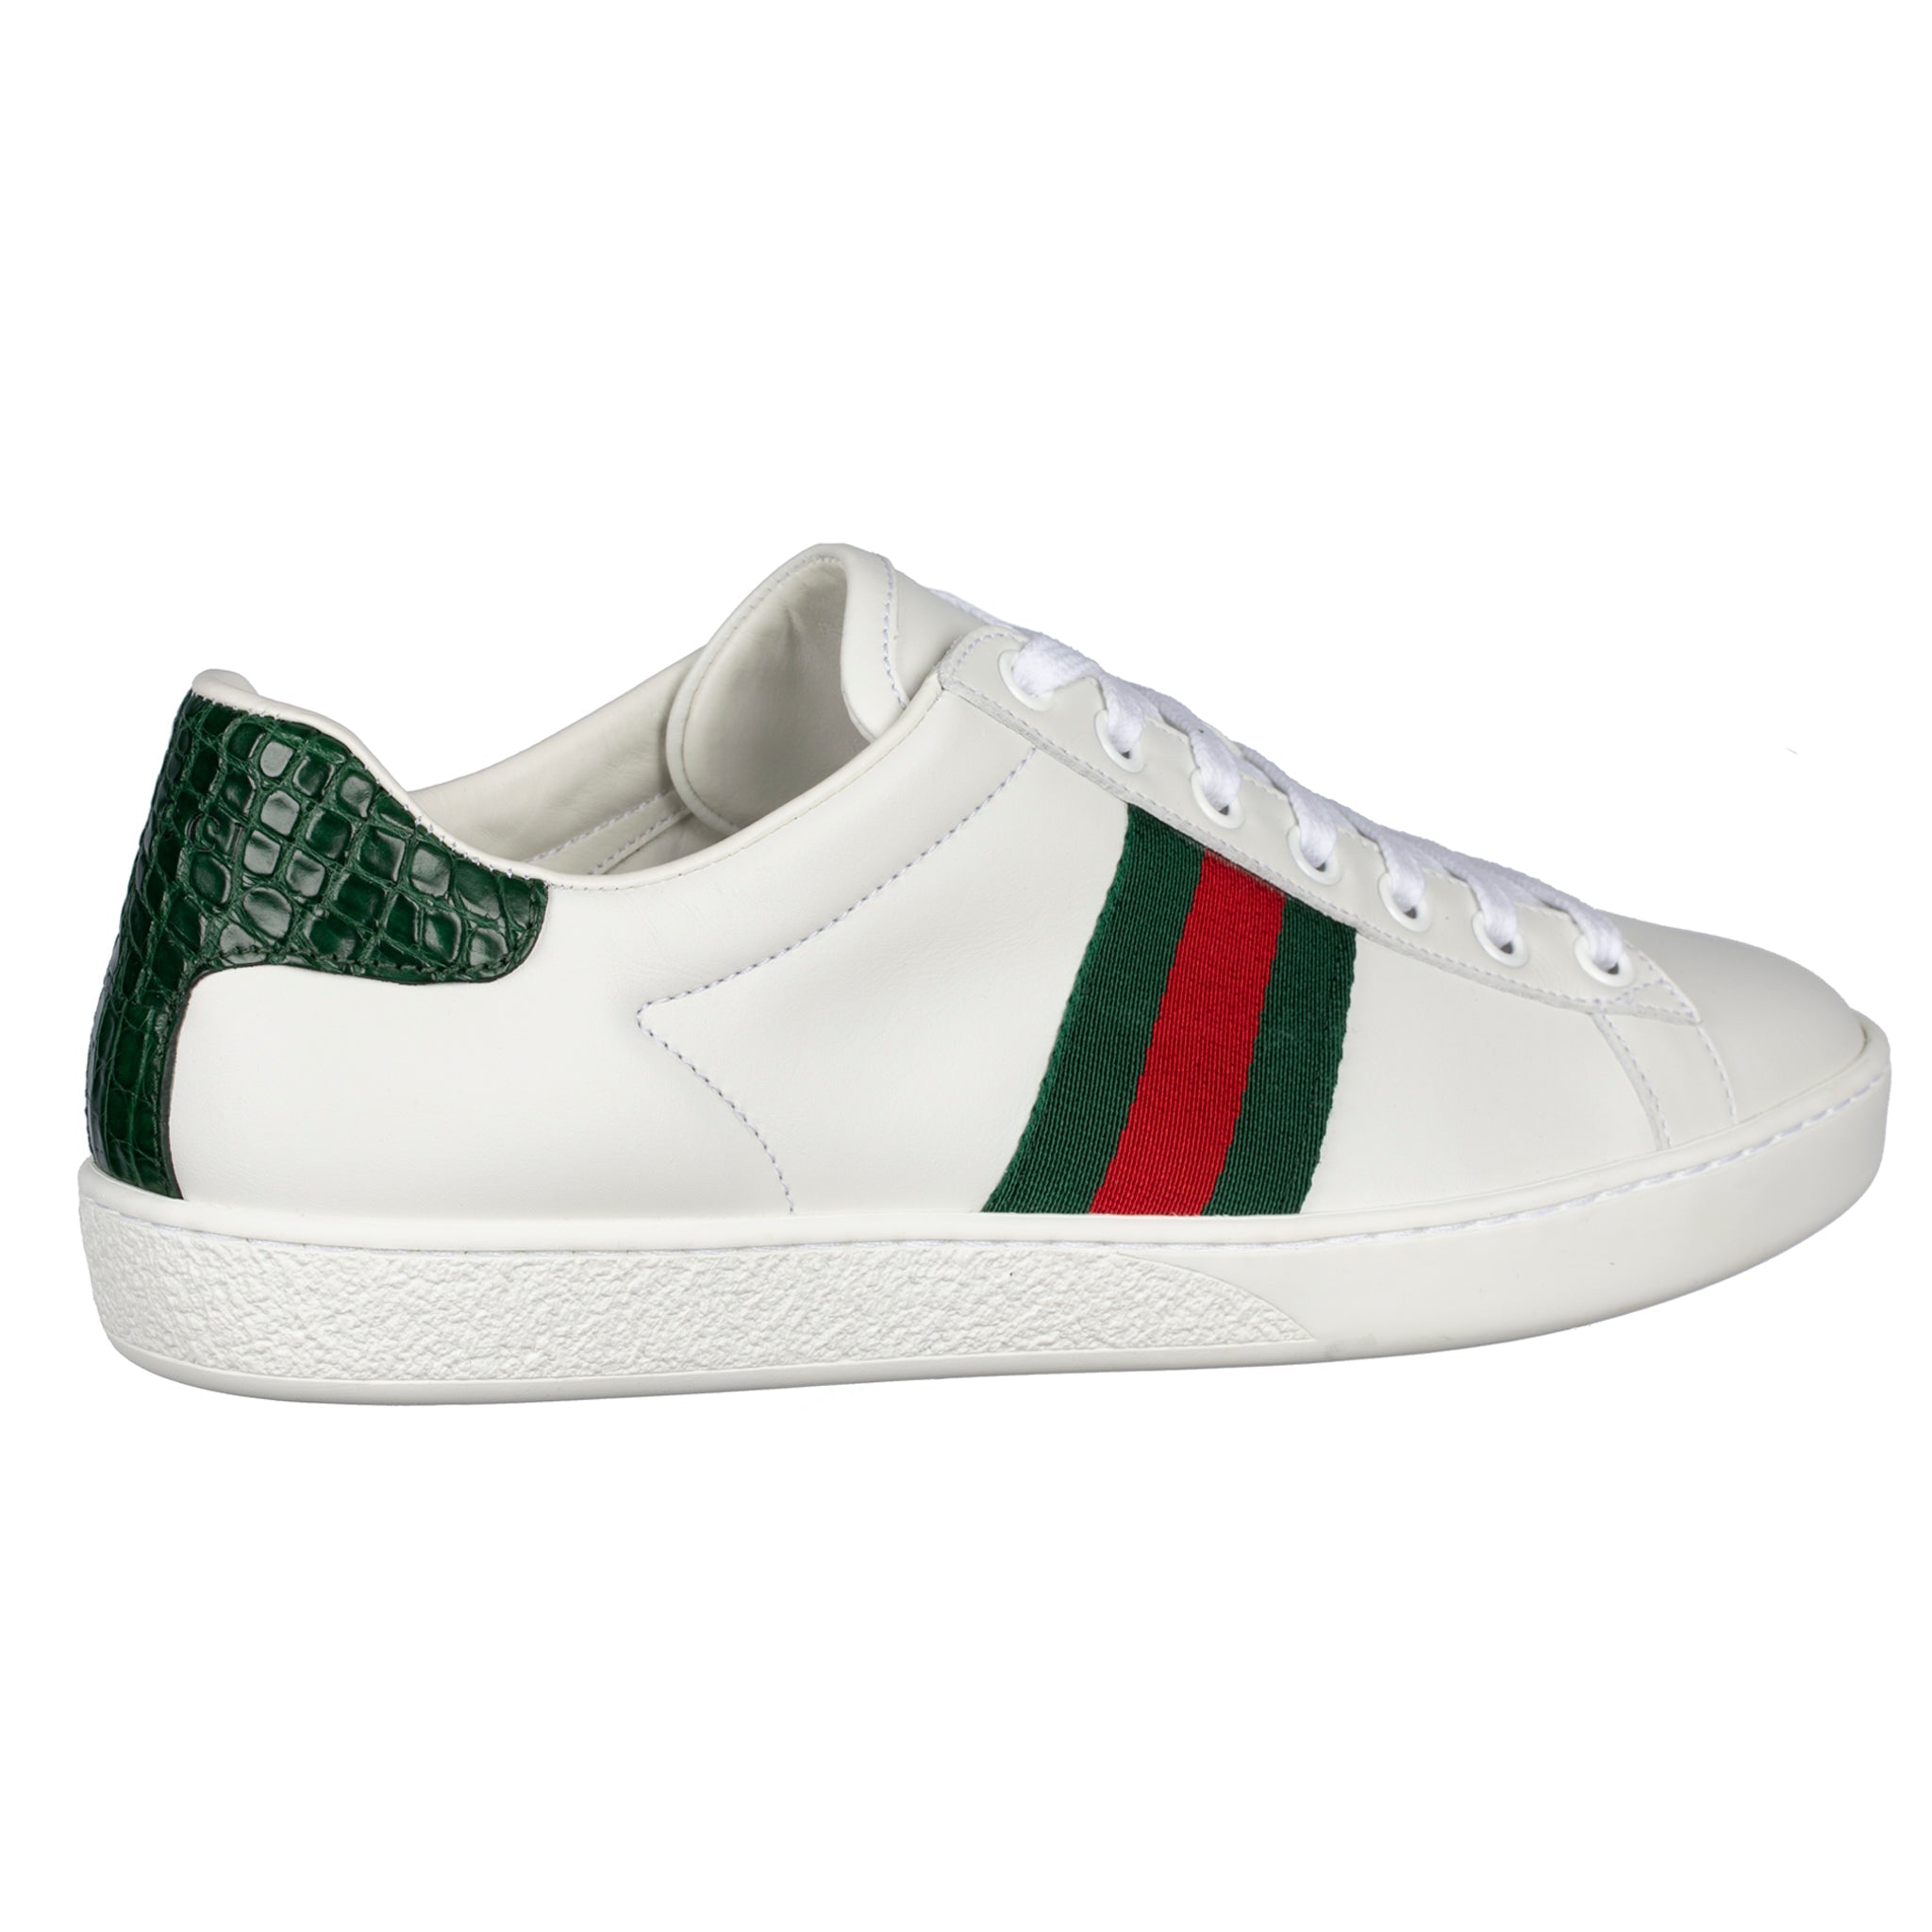 GUCCI ACE SNEAKER WHITE GREEN & RED STRIPE 38 IT - On Repeat